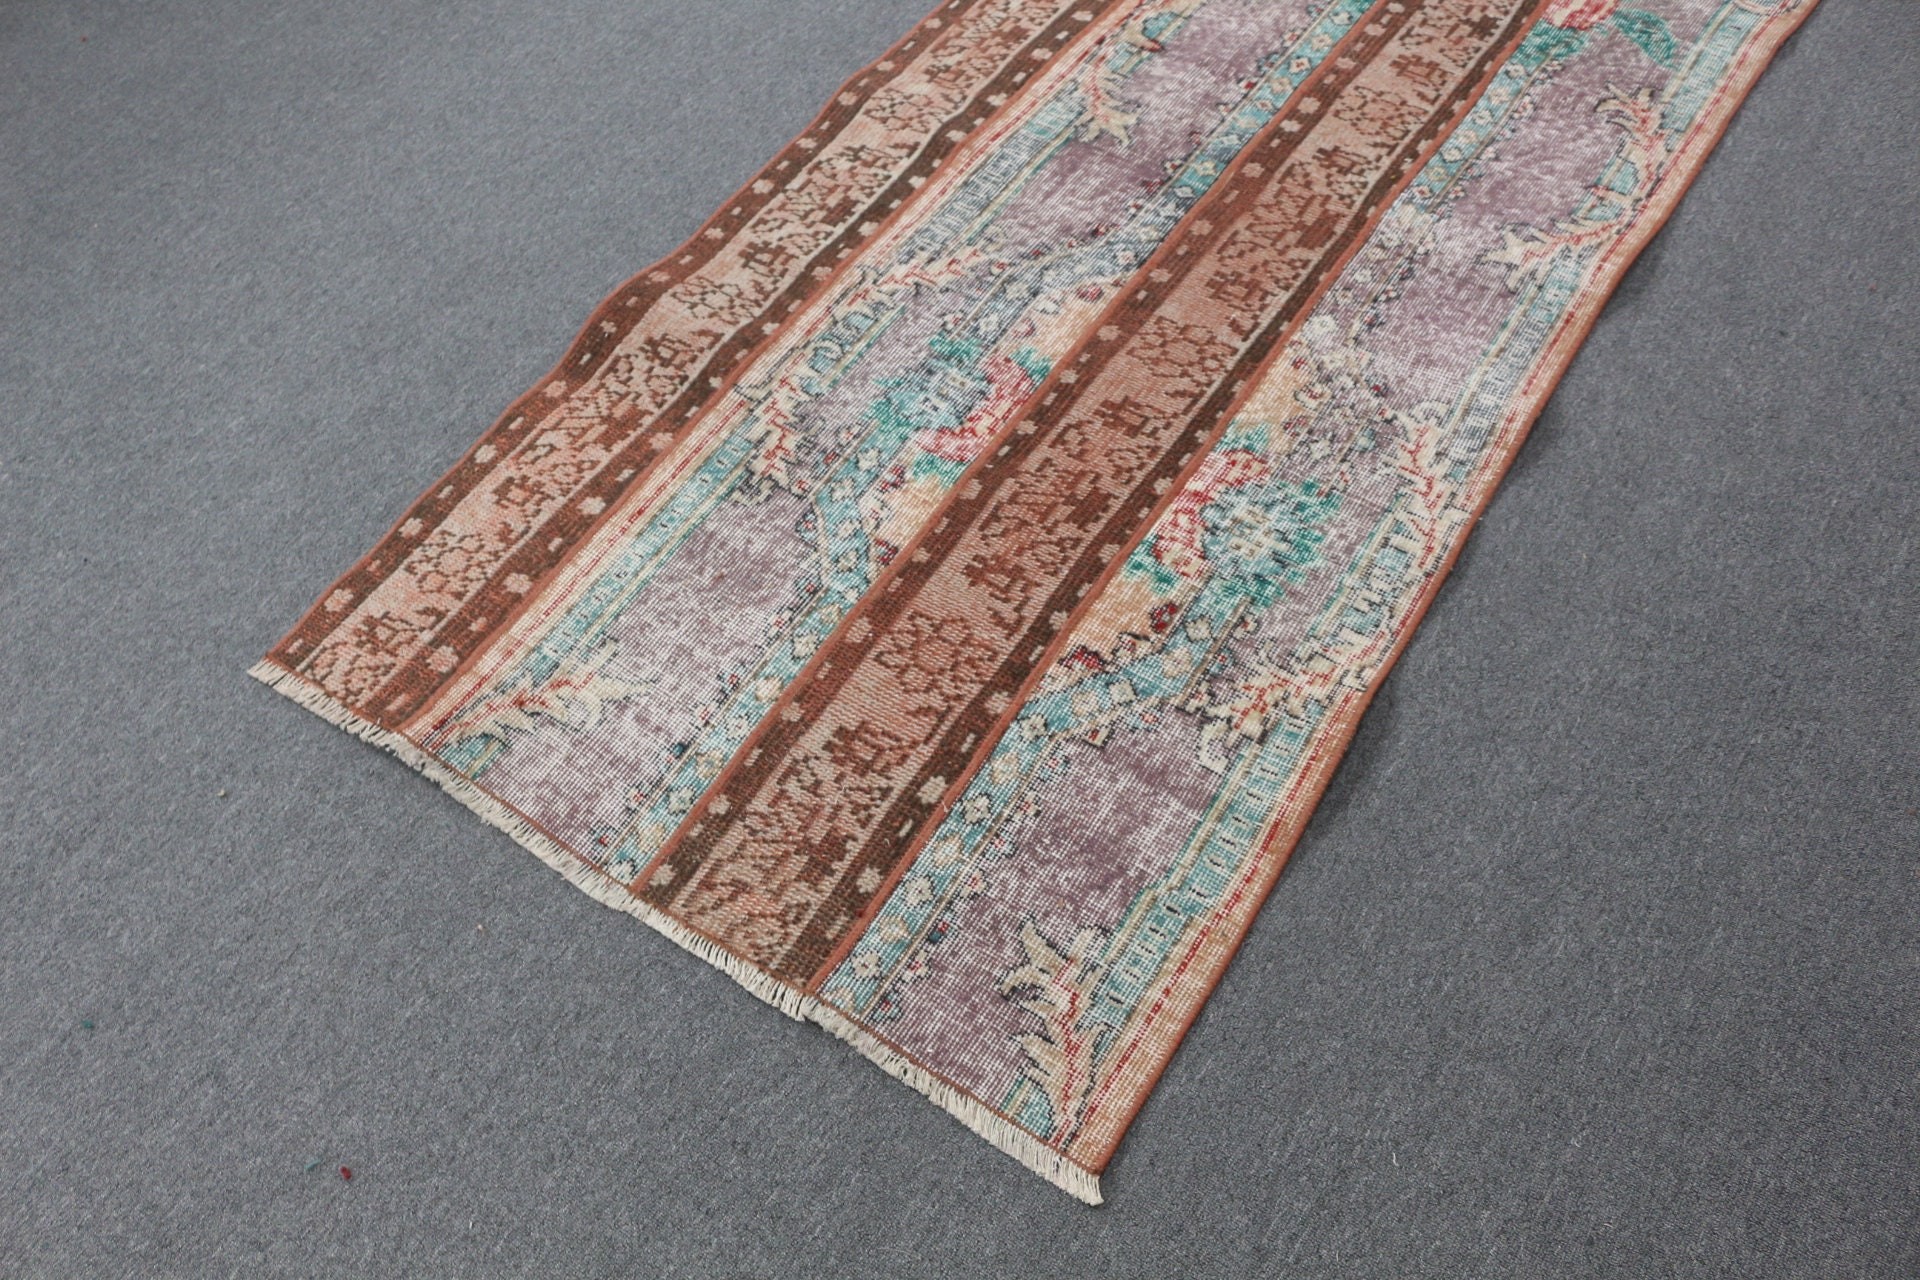 Bedroom Rugs, 3.1x6.7 ft Accent Rug, Brown Anatolian Rugs, Entry Rug, Turkish Rug, Oushak Rug, Moroccan Rug, Vintage Rug, Rugs for Kitchen